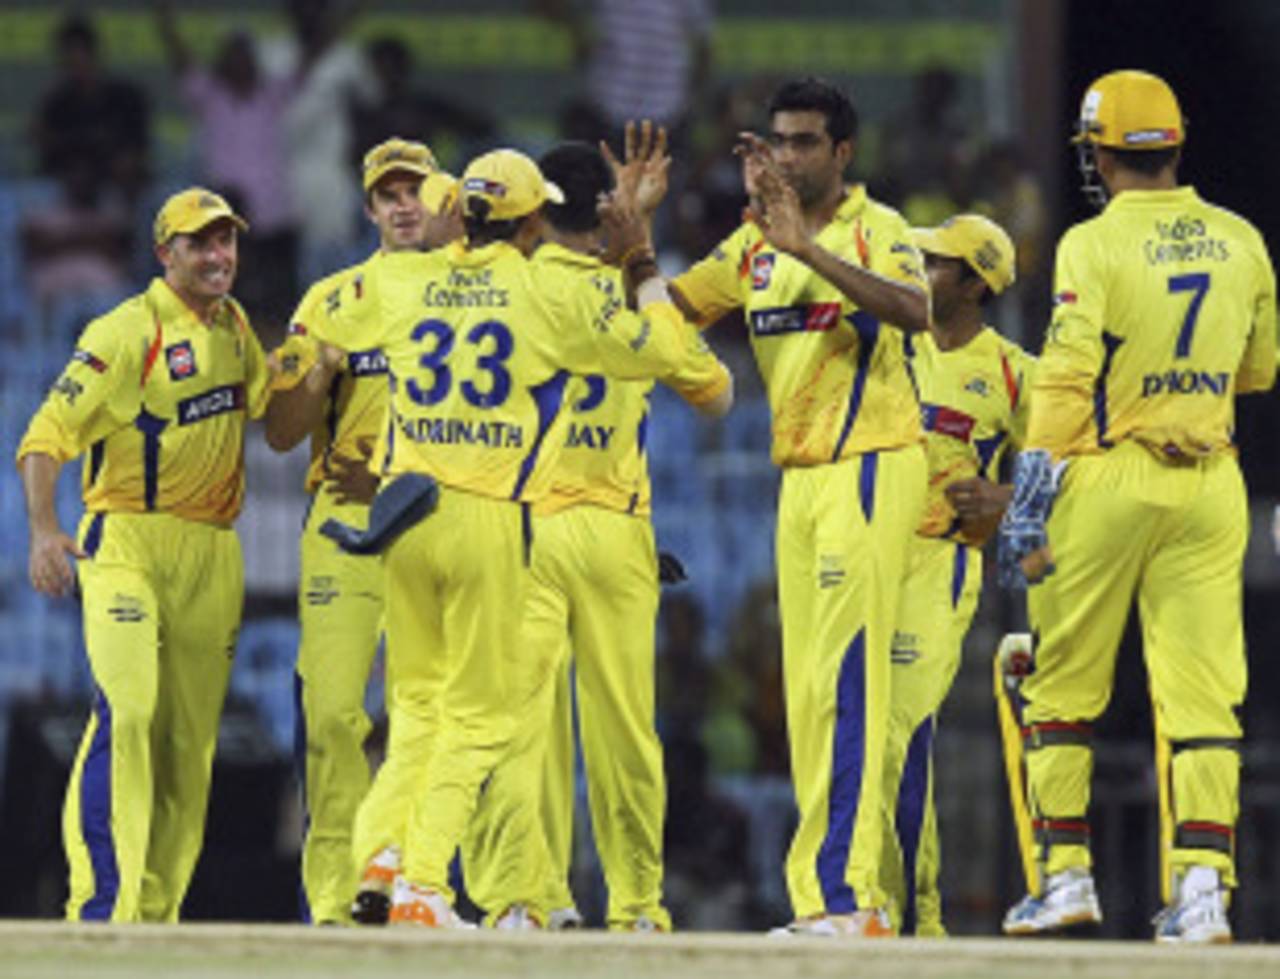 Chennai Super Kings lost four home games in the first season of the IPL, but this year they've won seven out of seven&nbsp;&nbsp;&bull;&nbsp;&nbsp;Associated Press